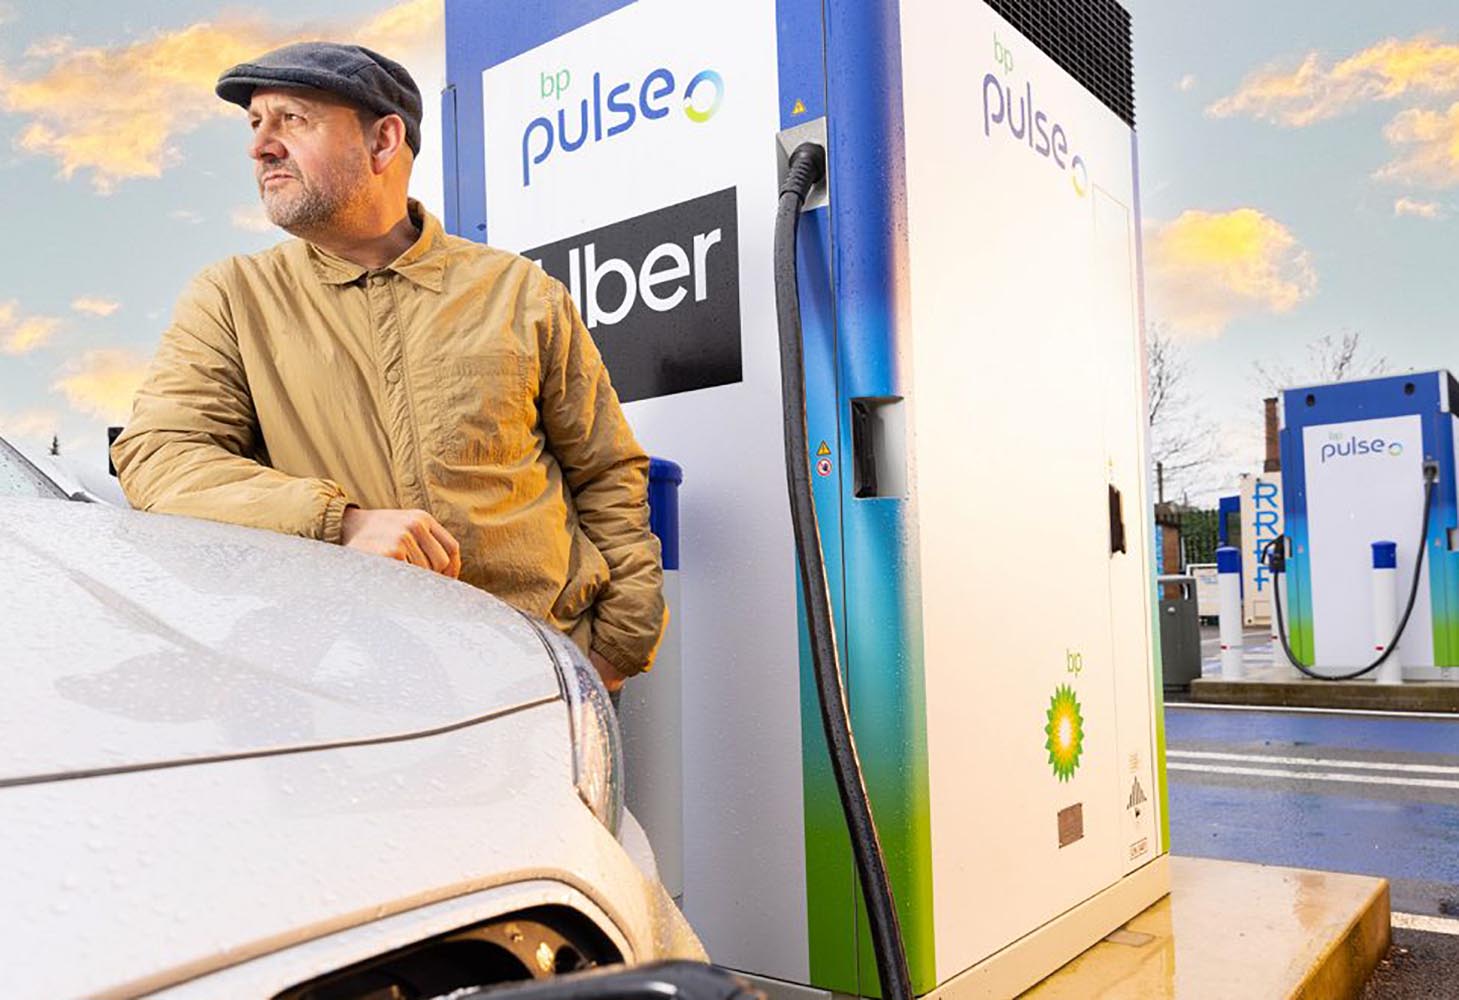 bp and Uber announce new global mobility agreement